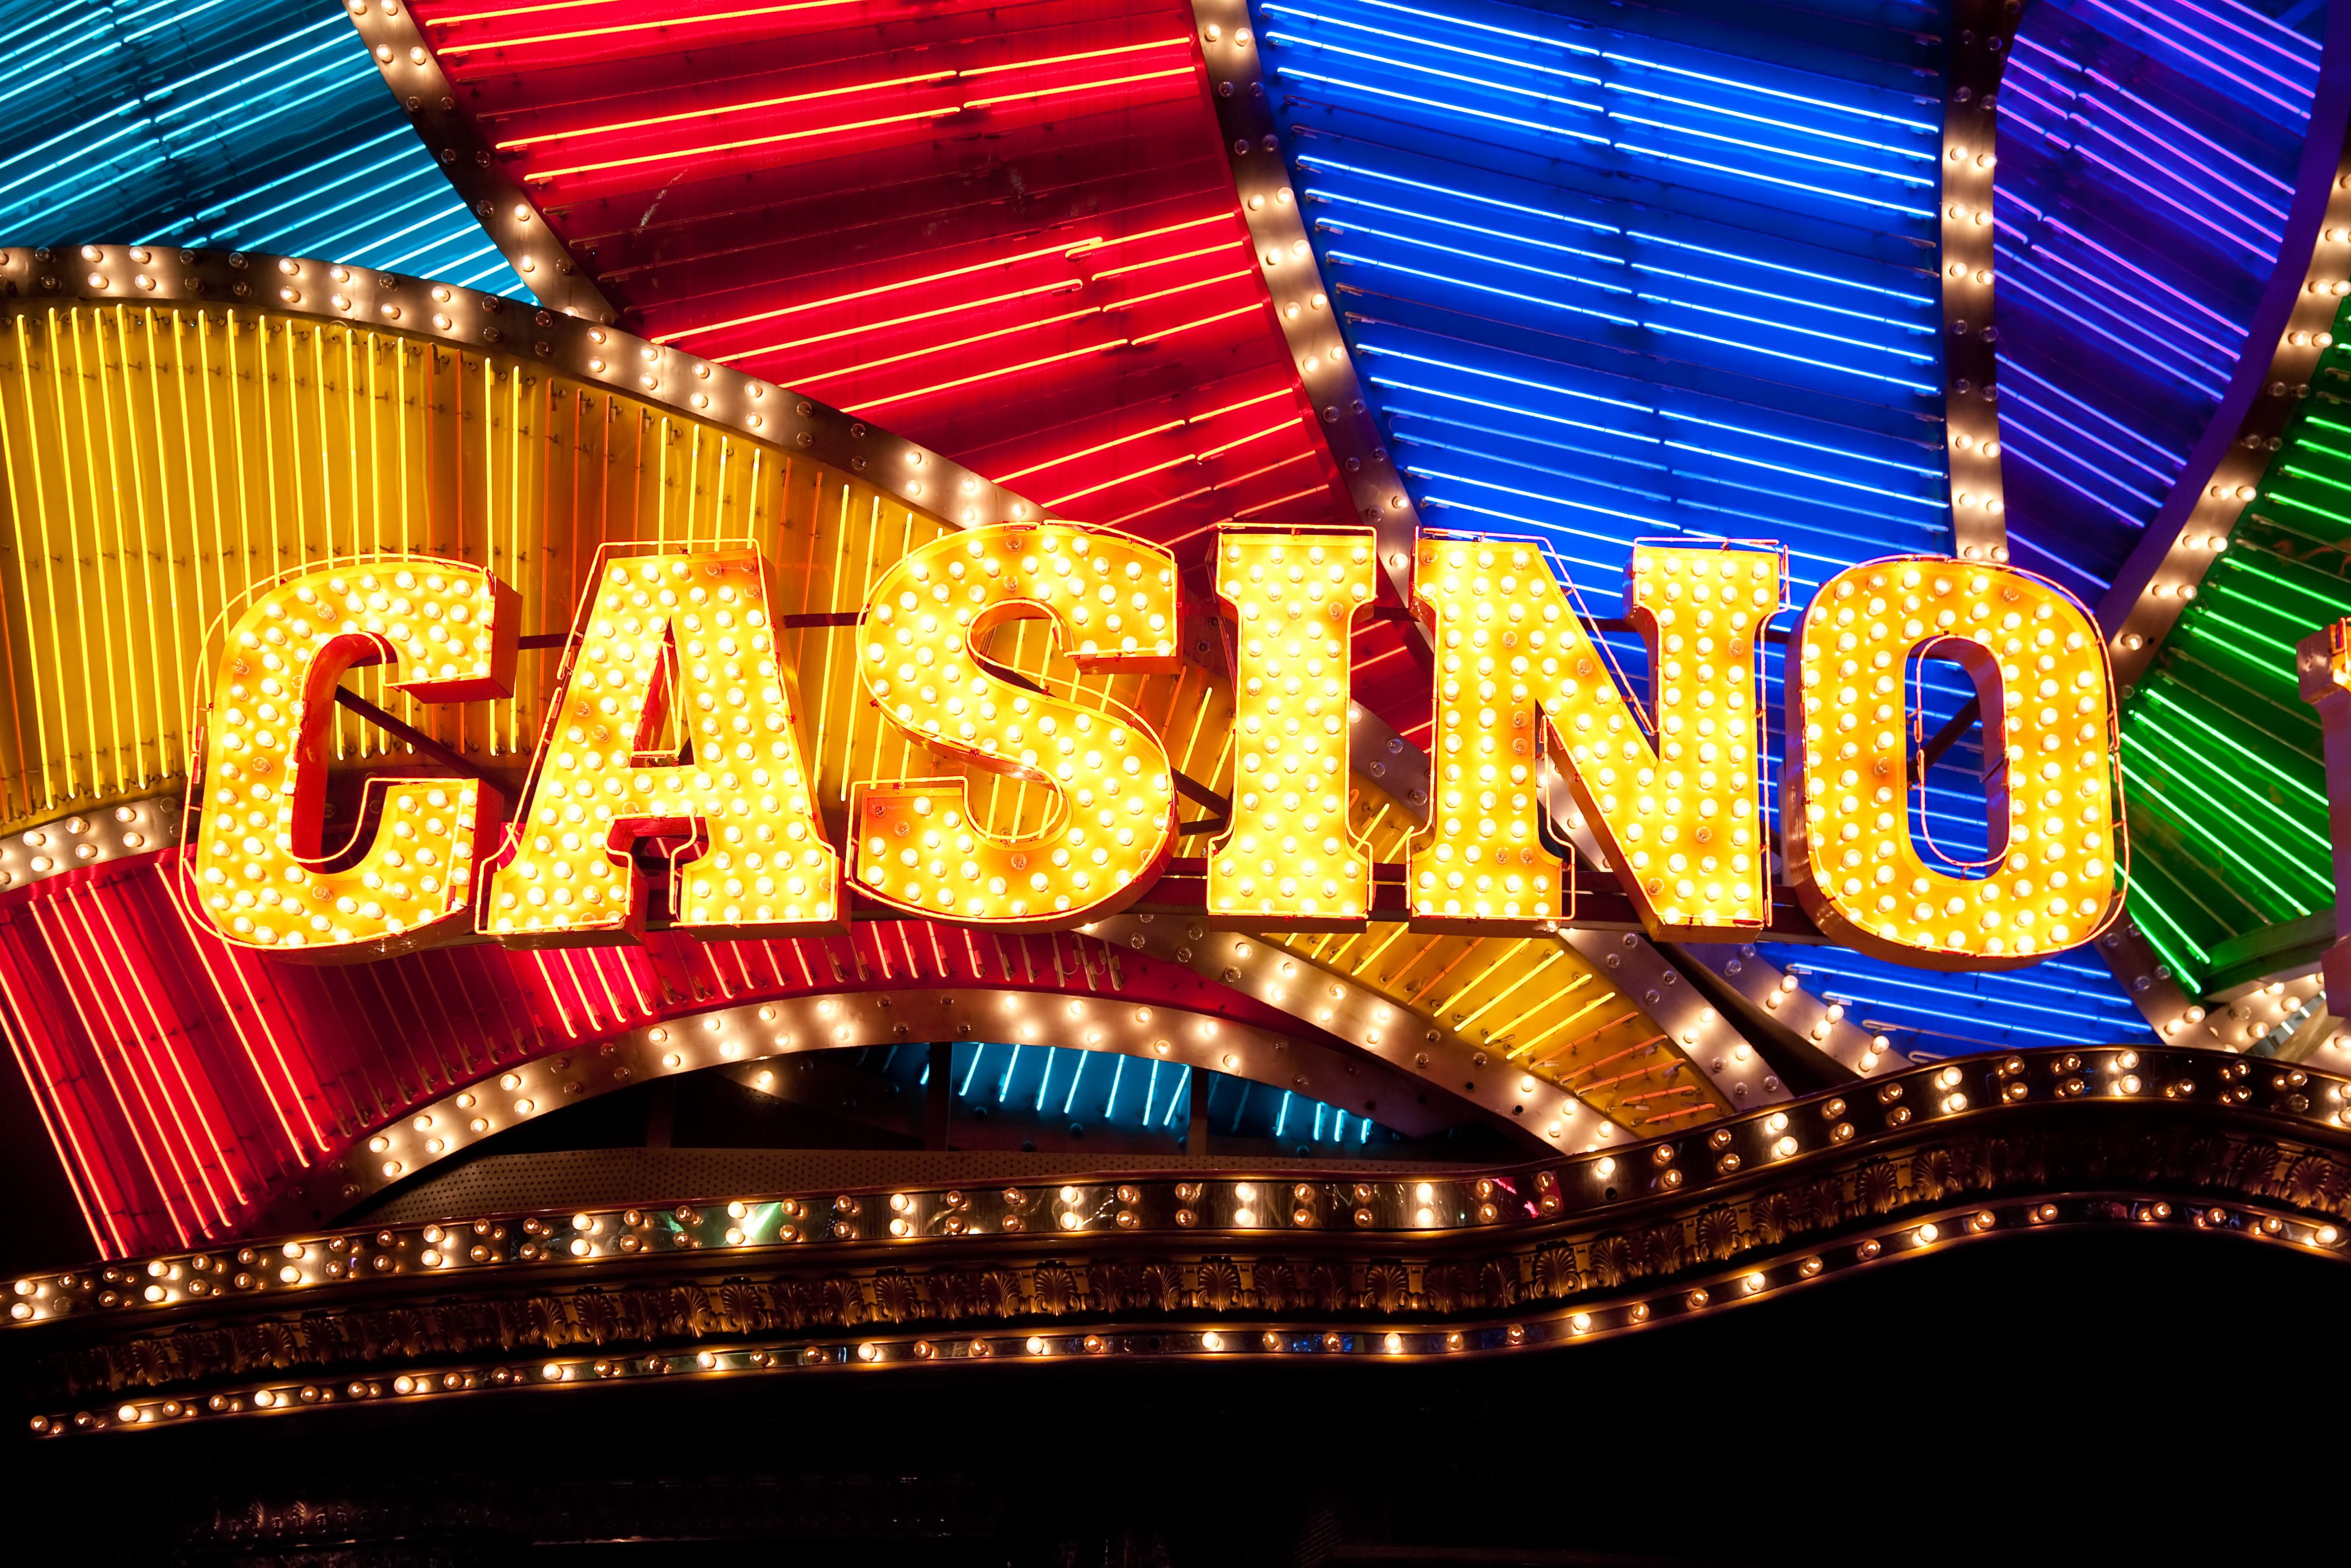 real money online casinos with best payouts